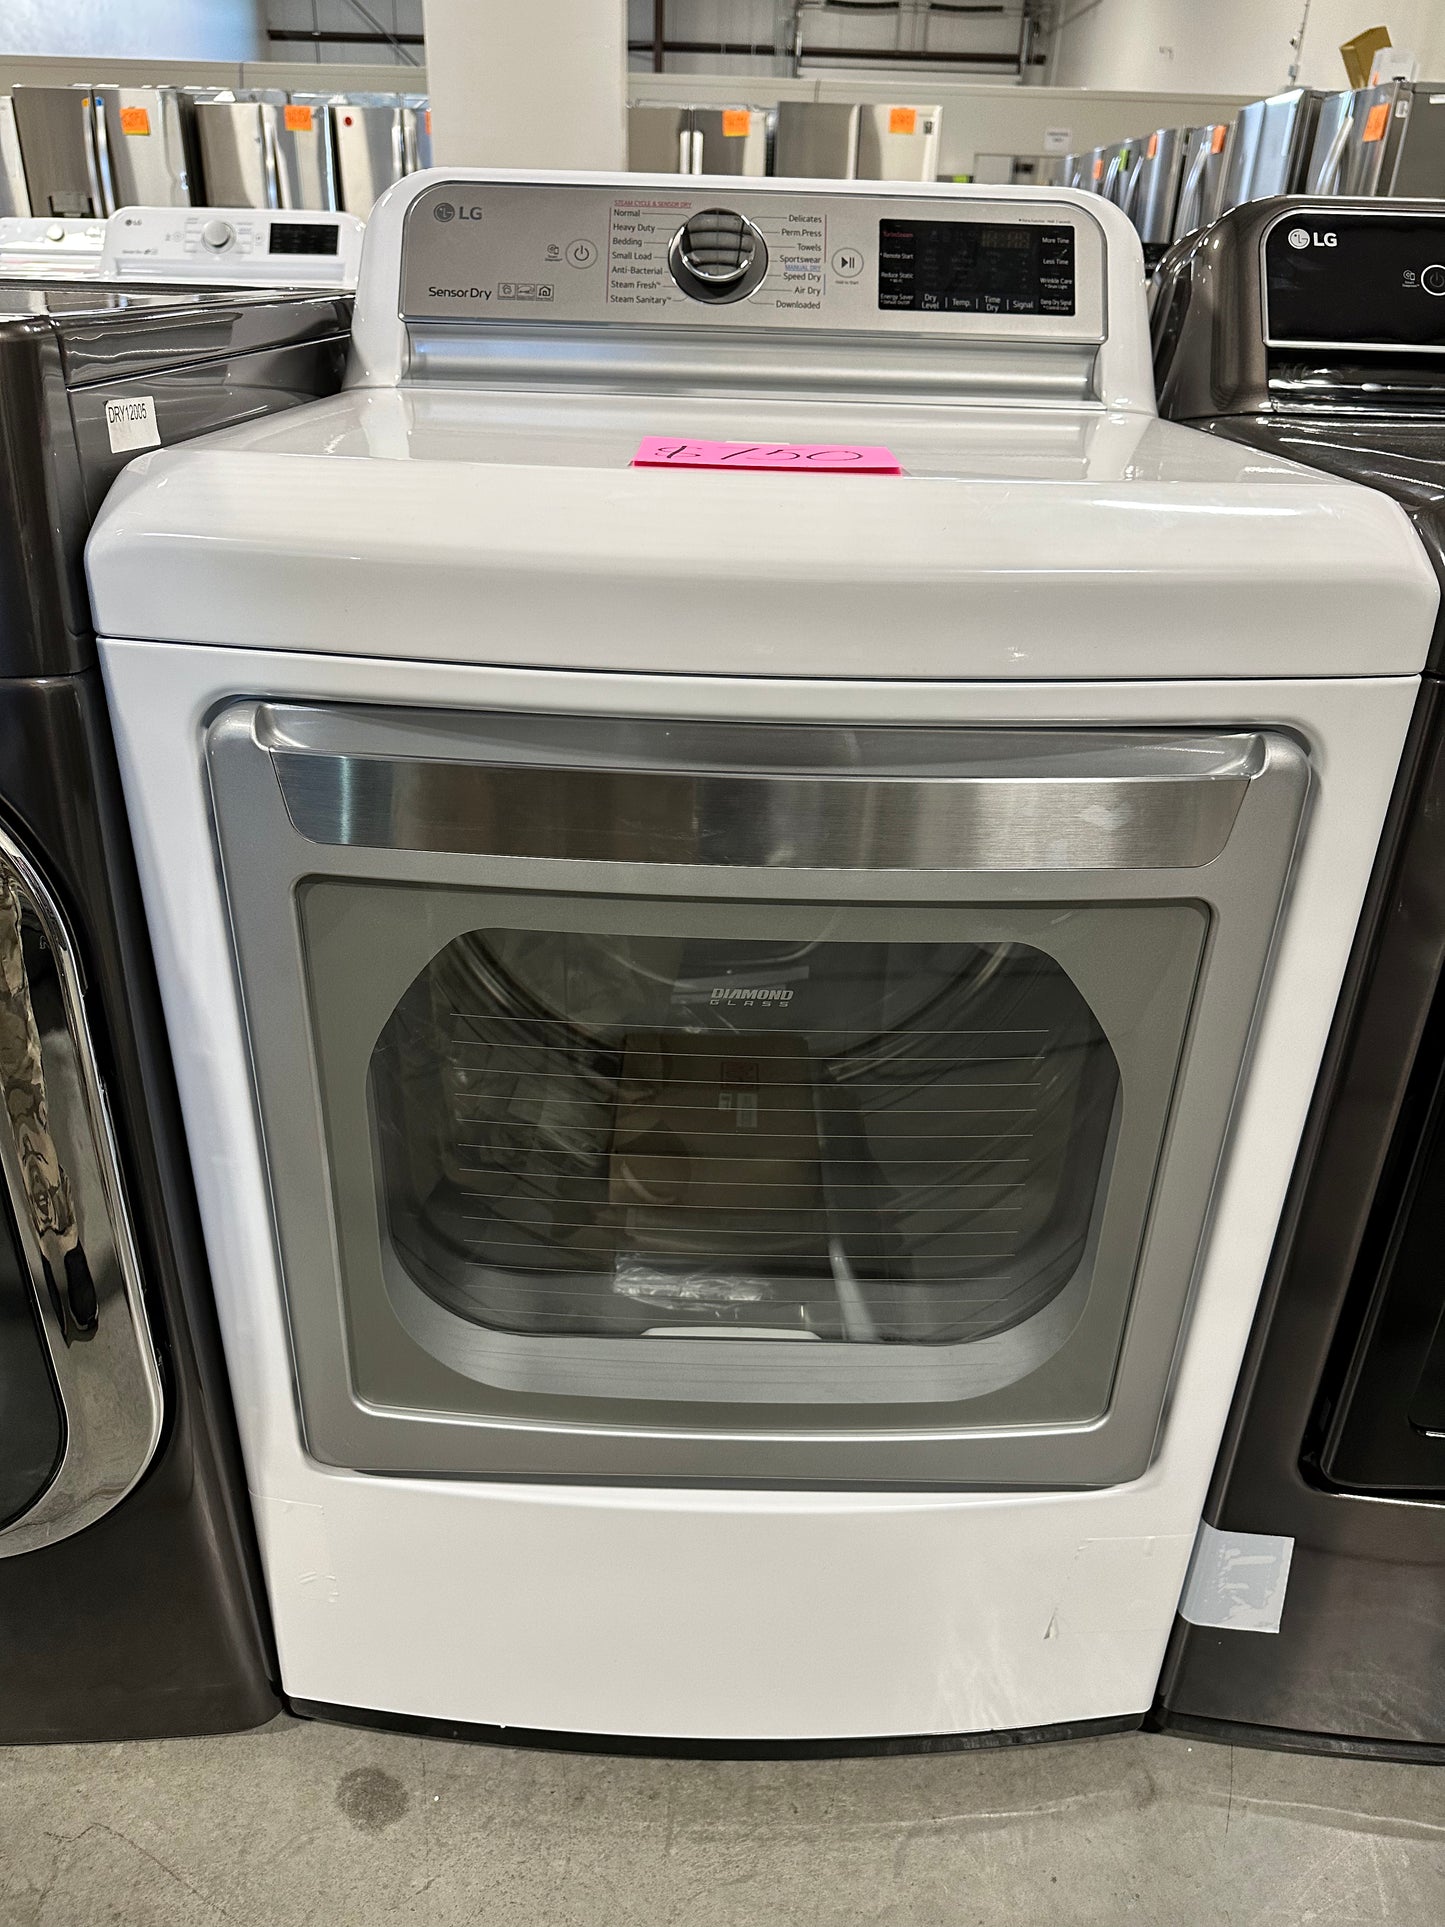 ELECTRIC DRYER WITH STEAM AND SENSOR DRY - NEW - DRY11845